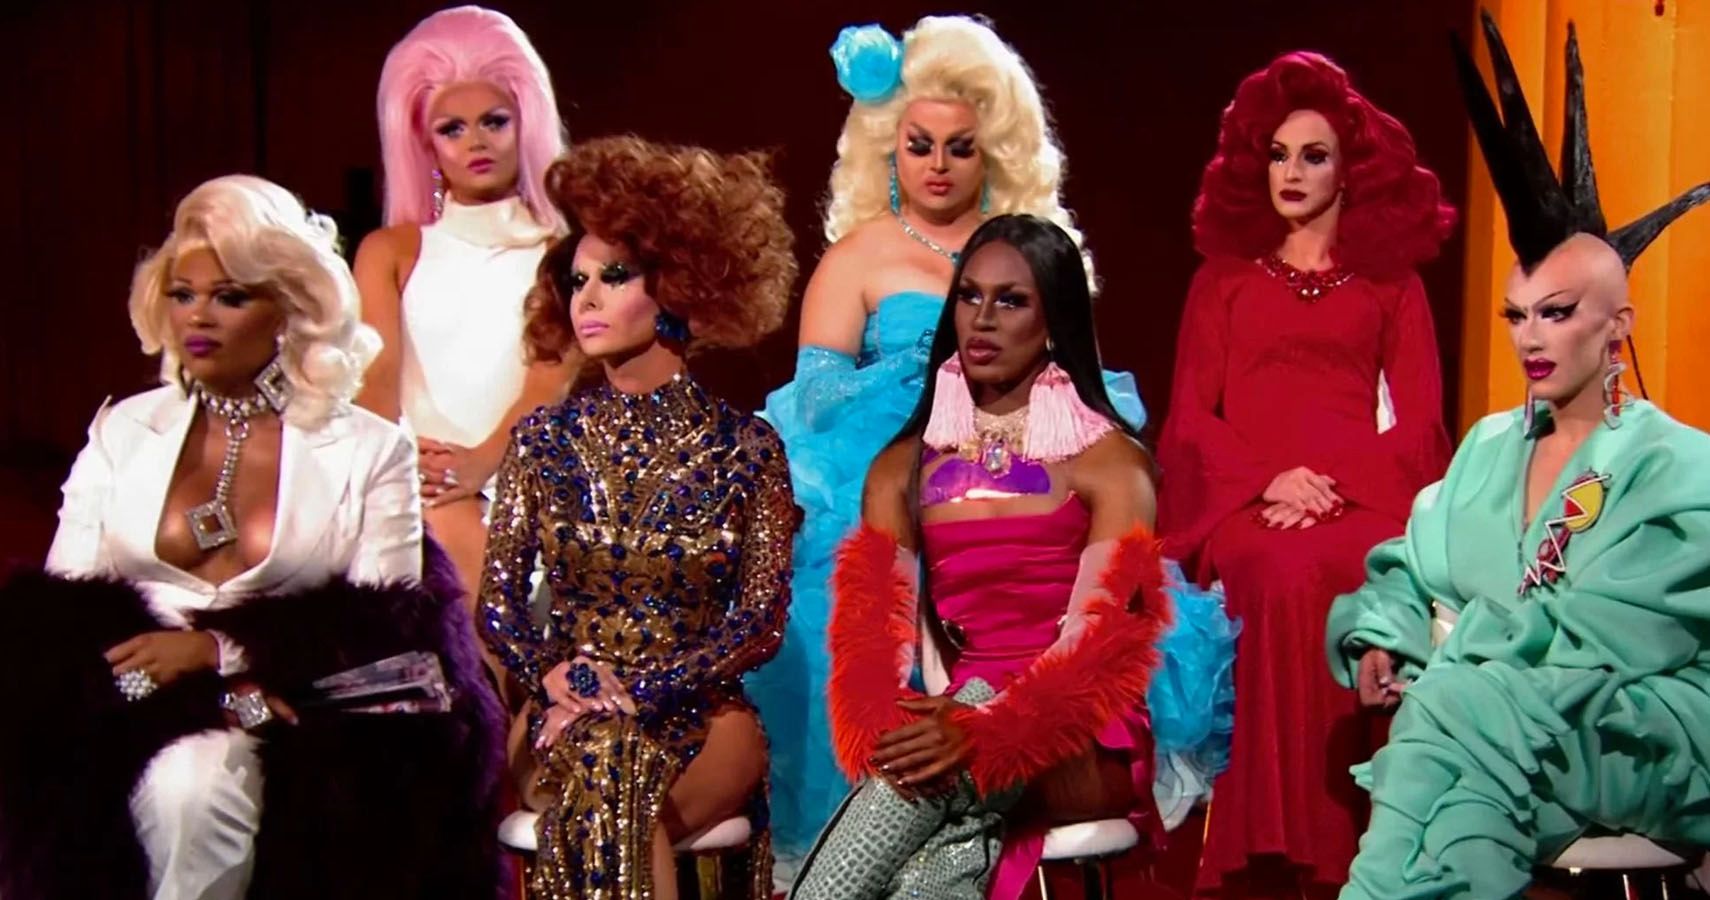 RuPaul's Drag Race: All 11 Seasons Ranked Worst To Best1710 x 900